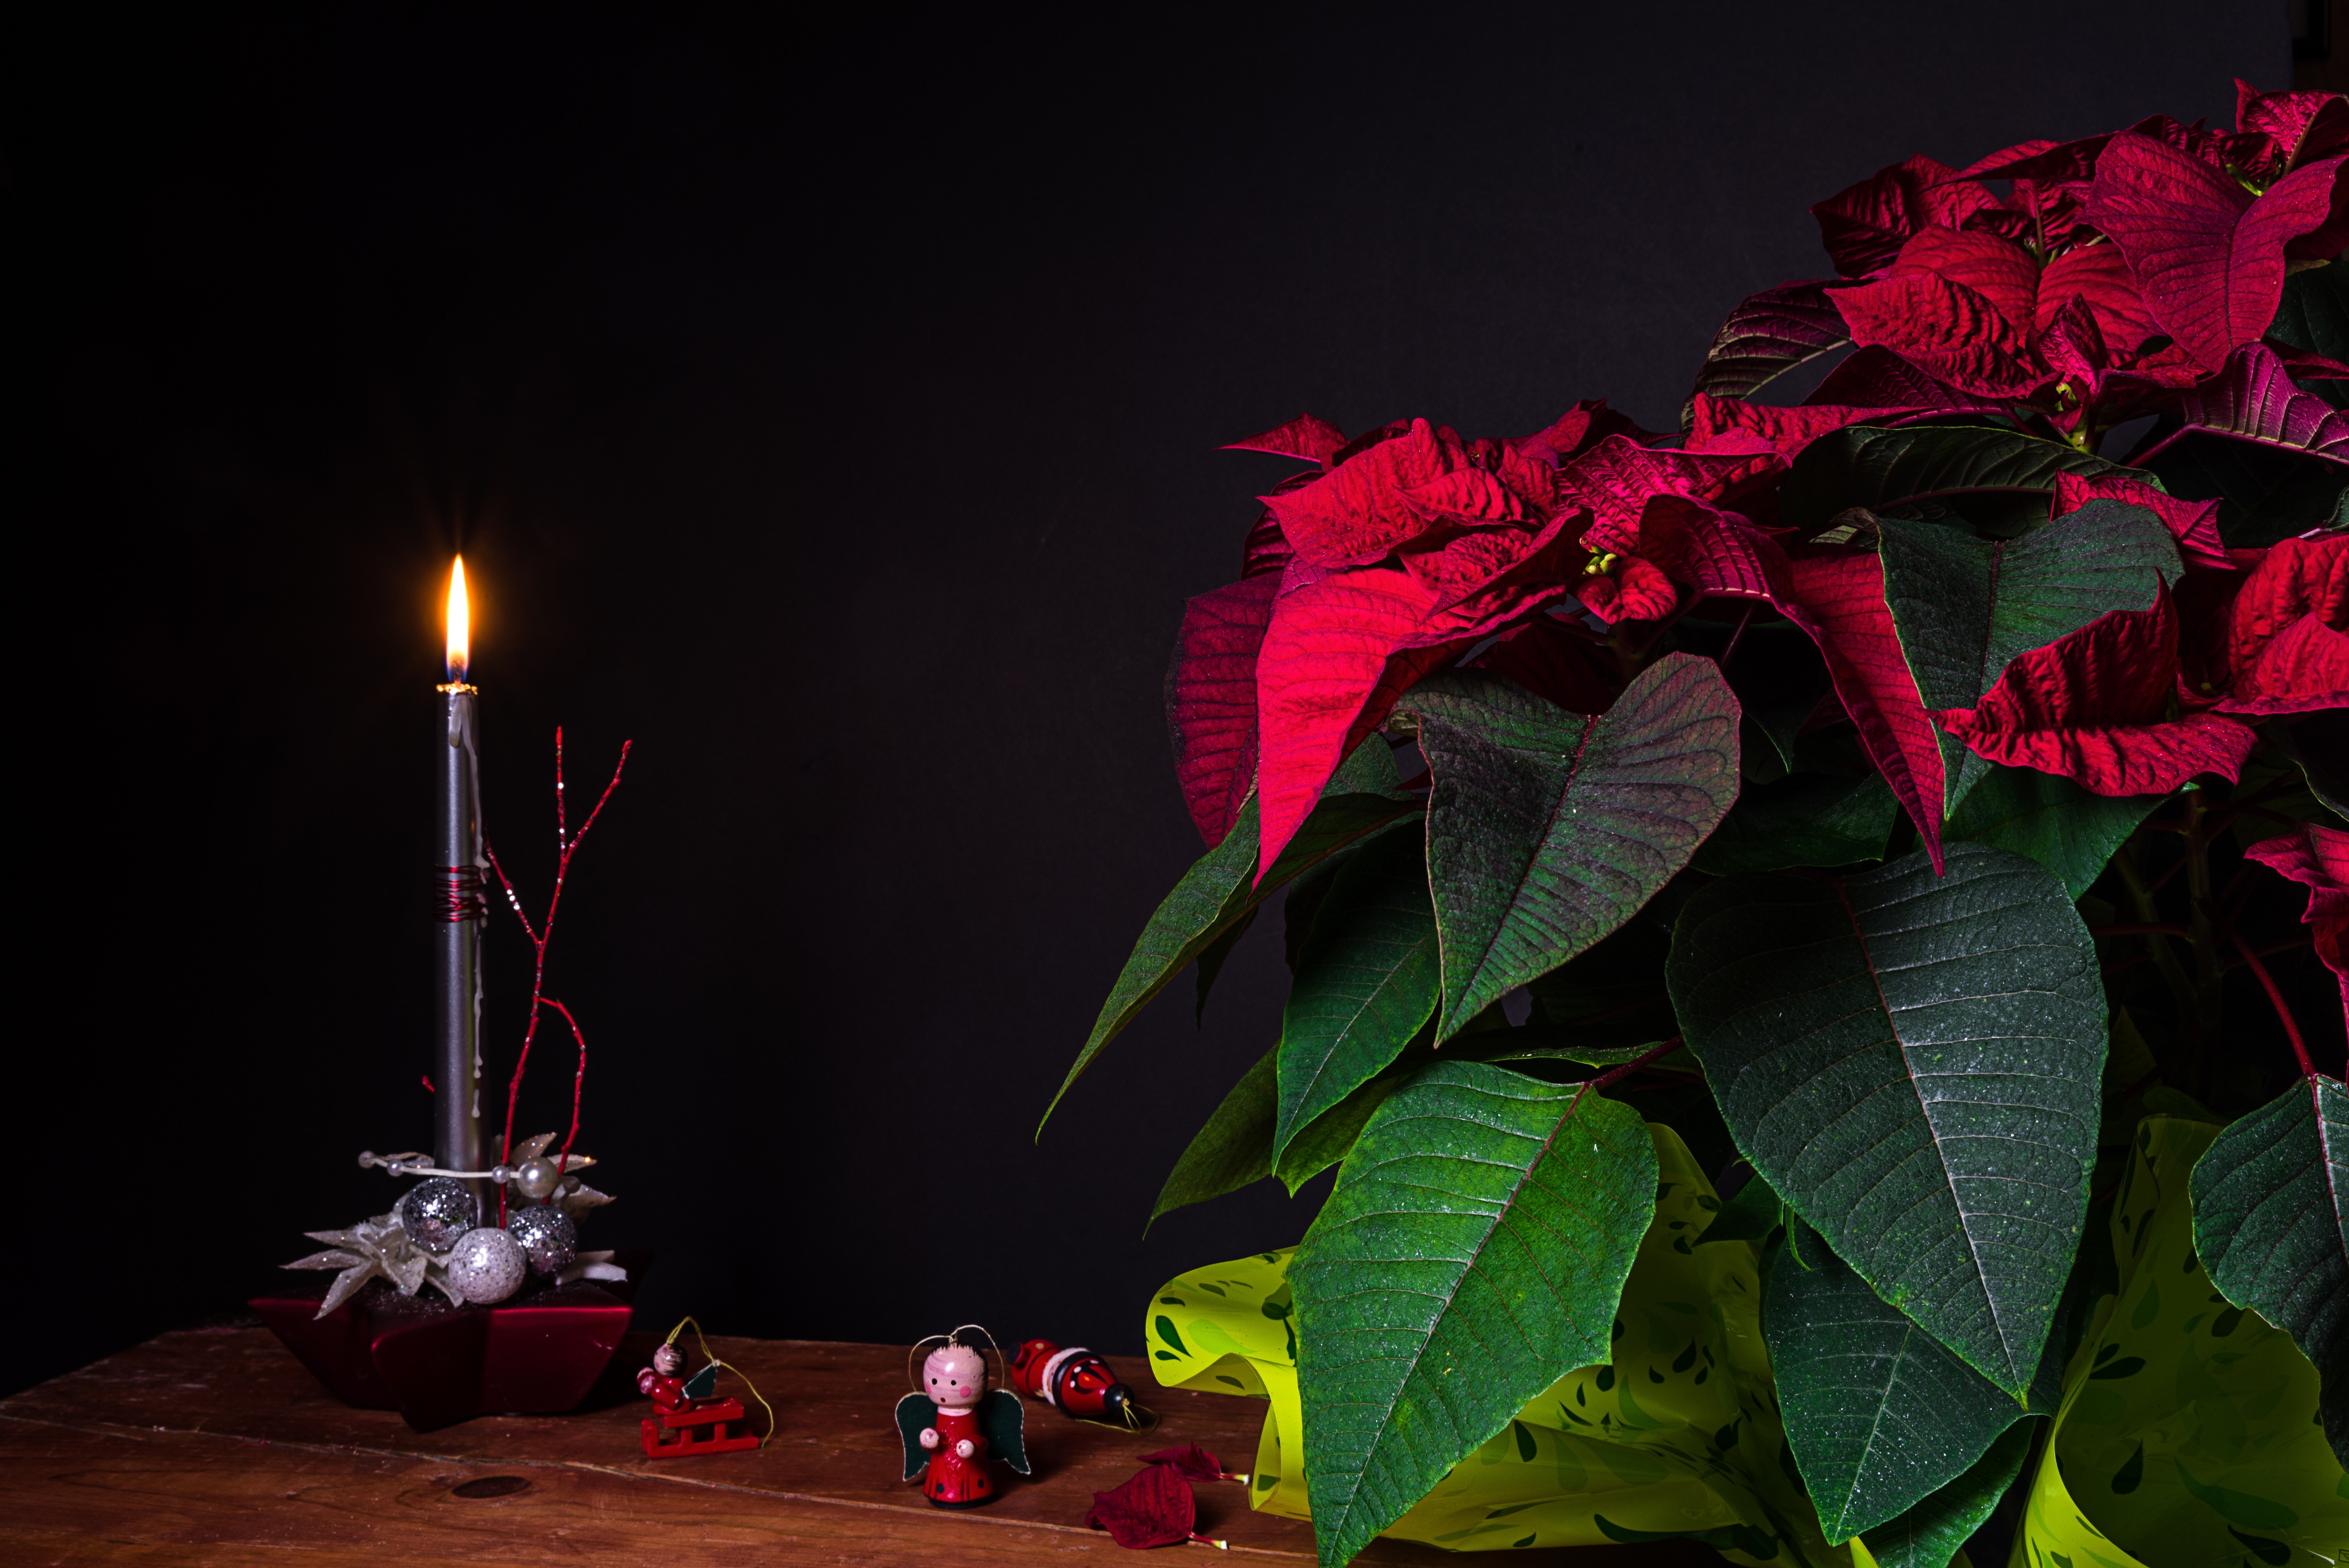 red flower on green plant boccie on brown wooden table with stainless steel framed candle stick